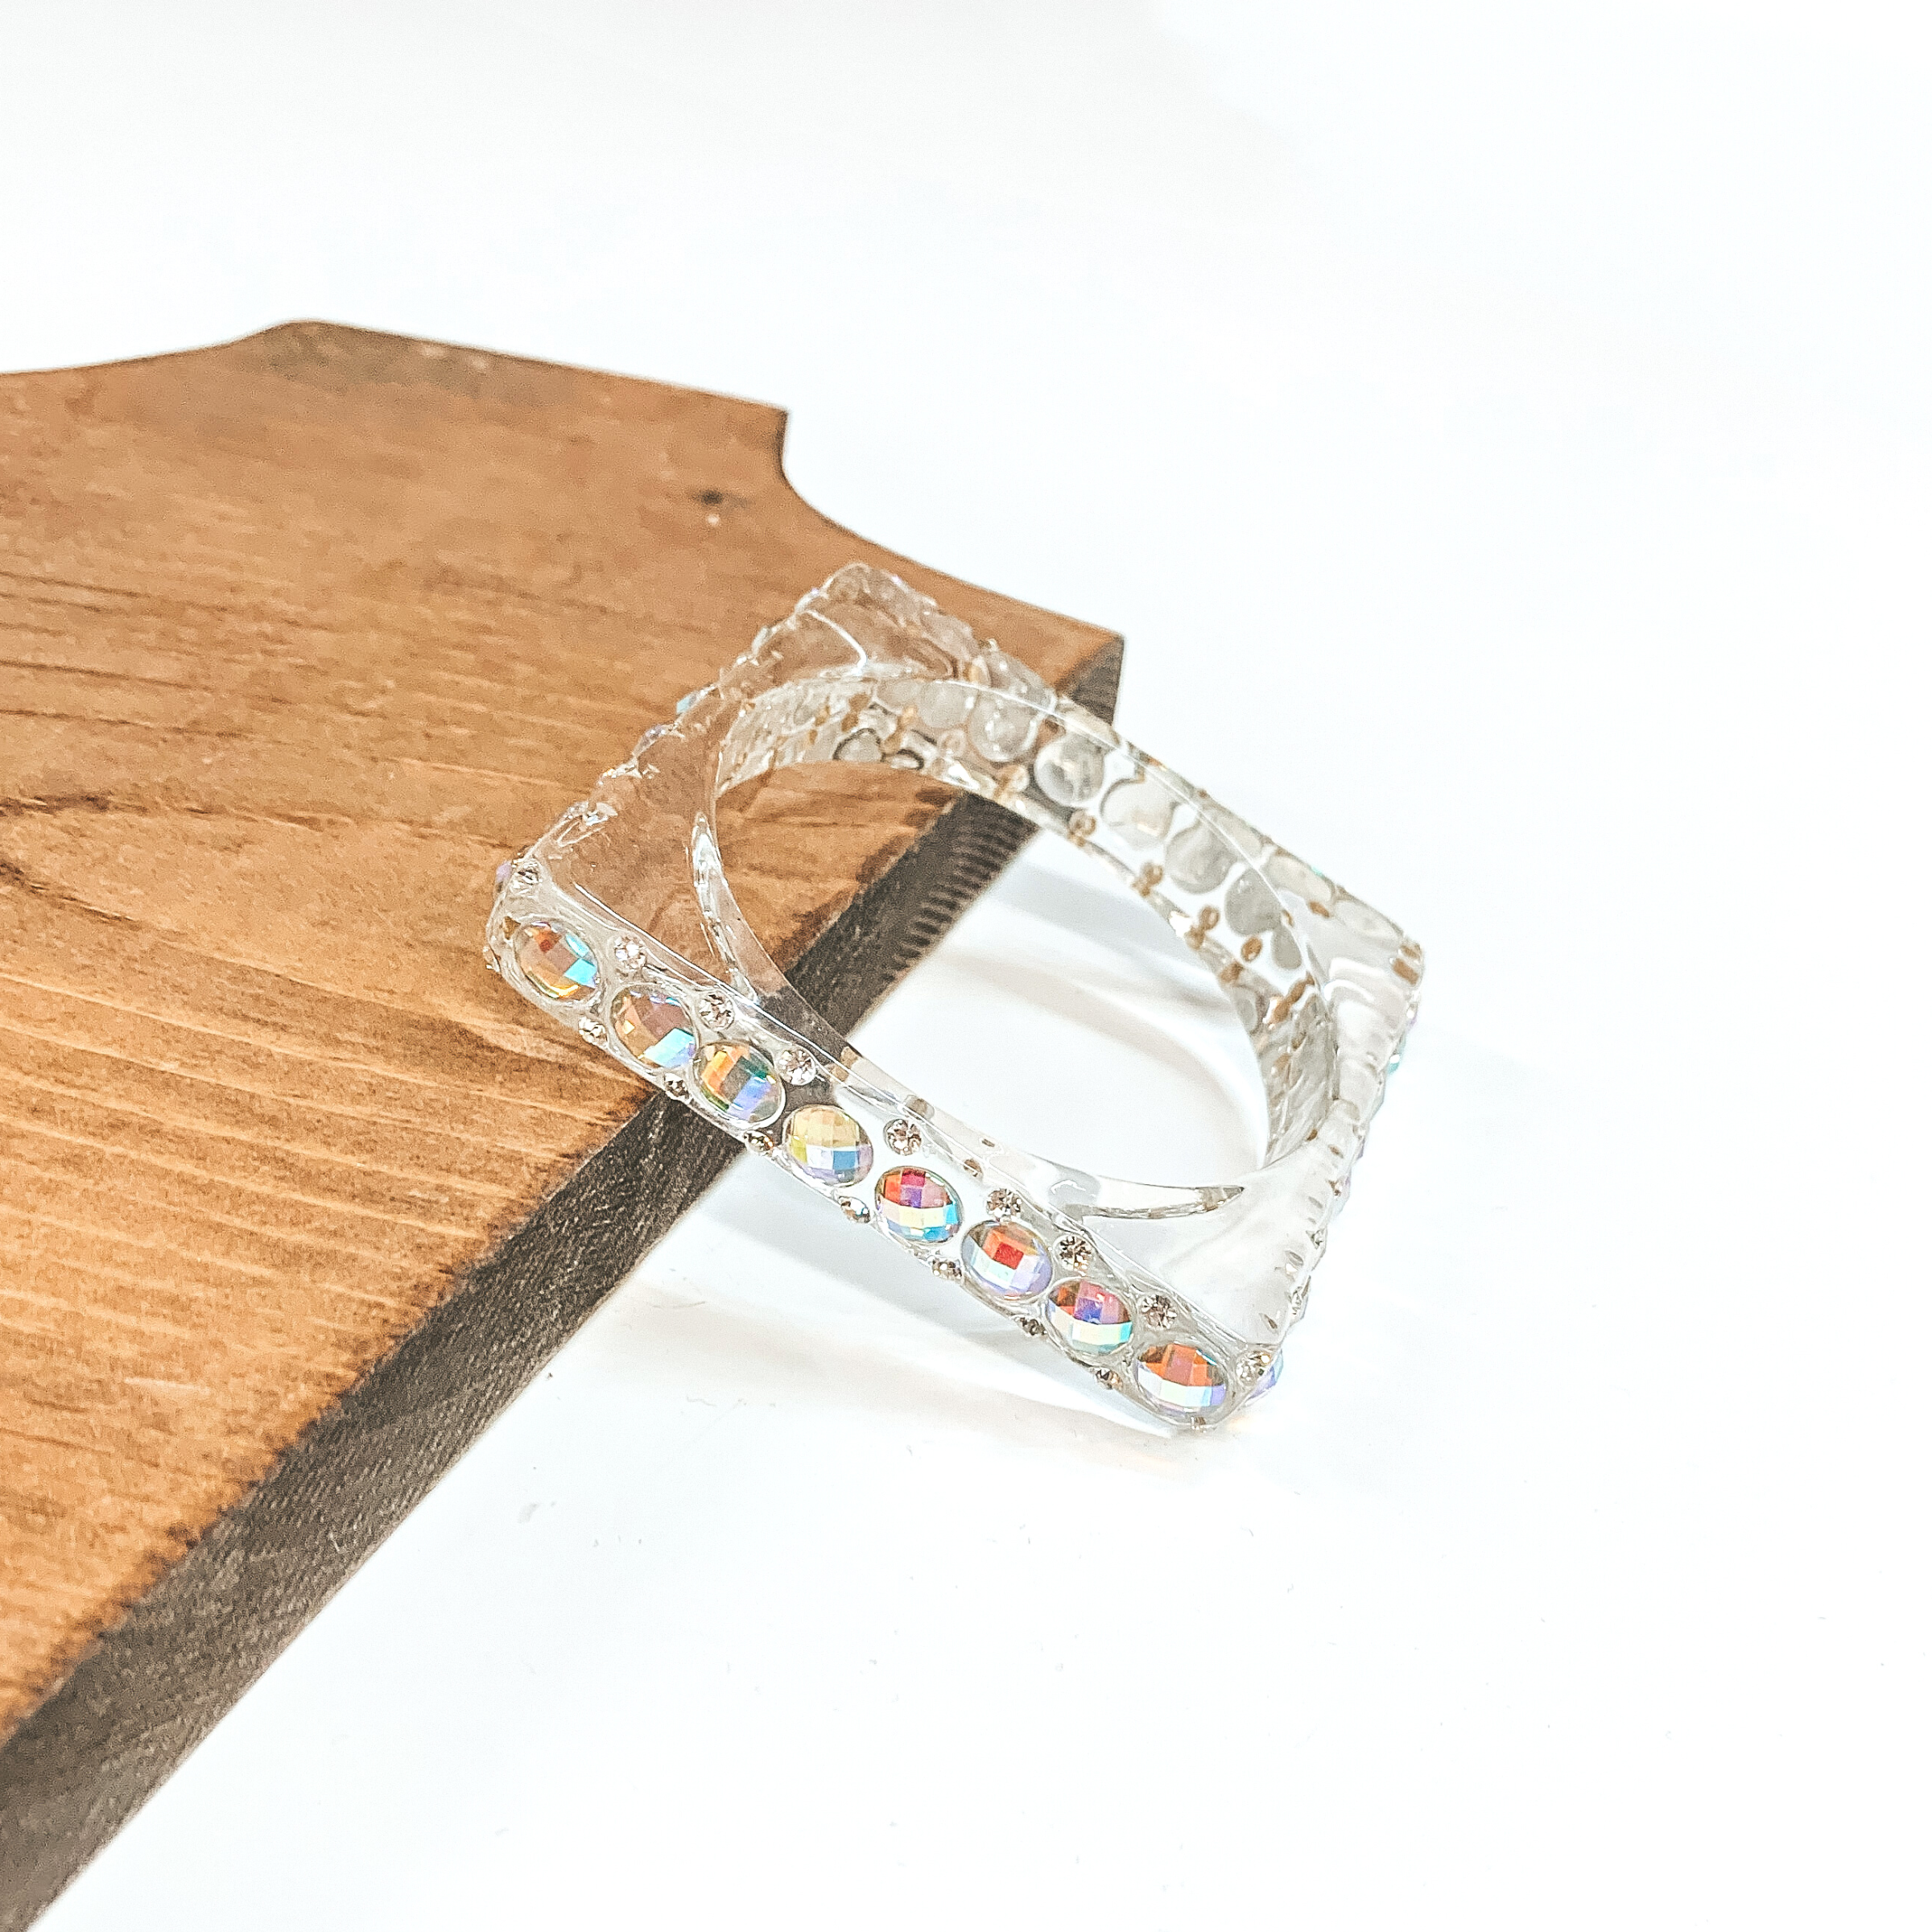 SALE Square Crystal Bangle in Assorted Colors - Giddy Up Glamour Boutique